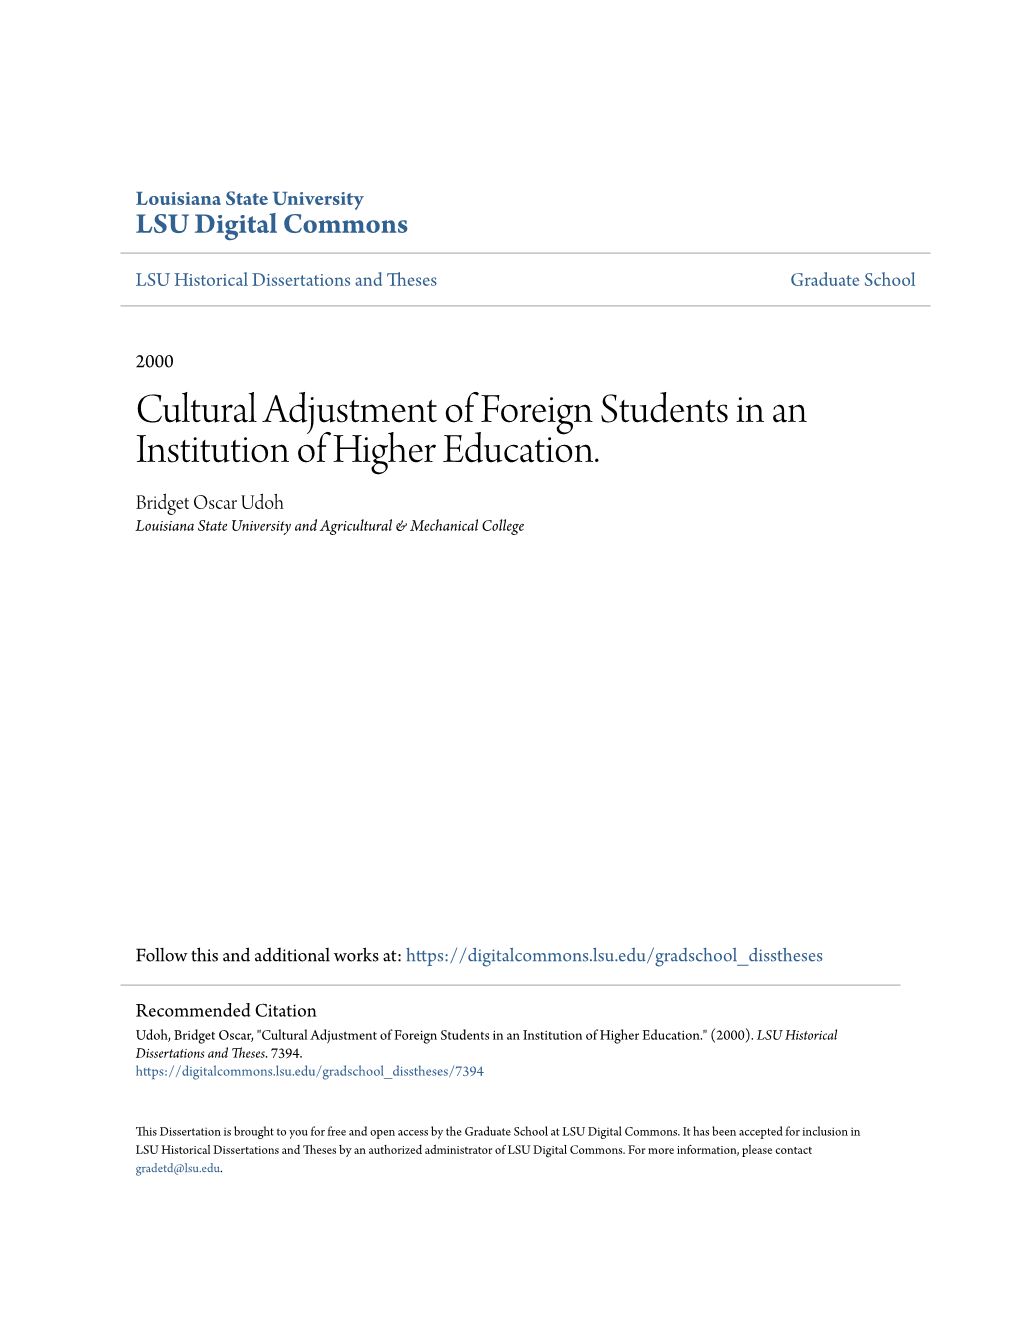 Cultural Adjustment of Foreign Students in an Institution of Higher Education